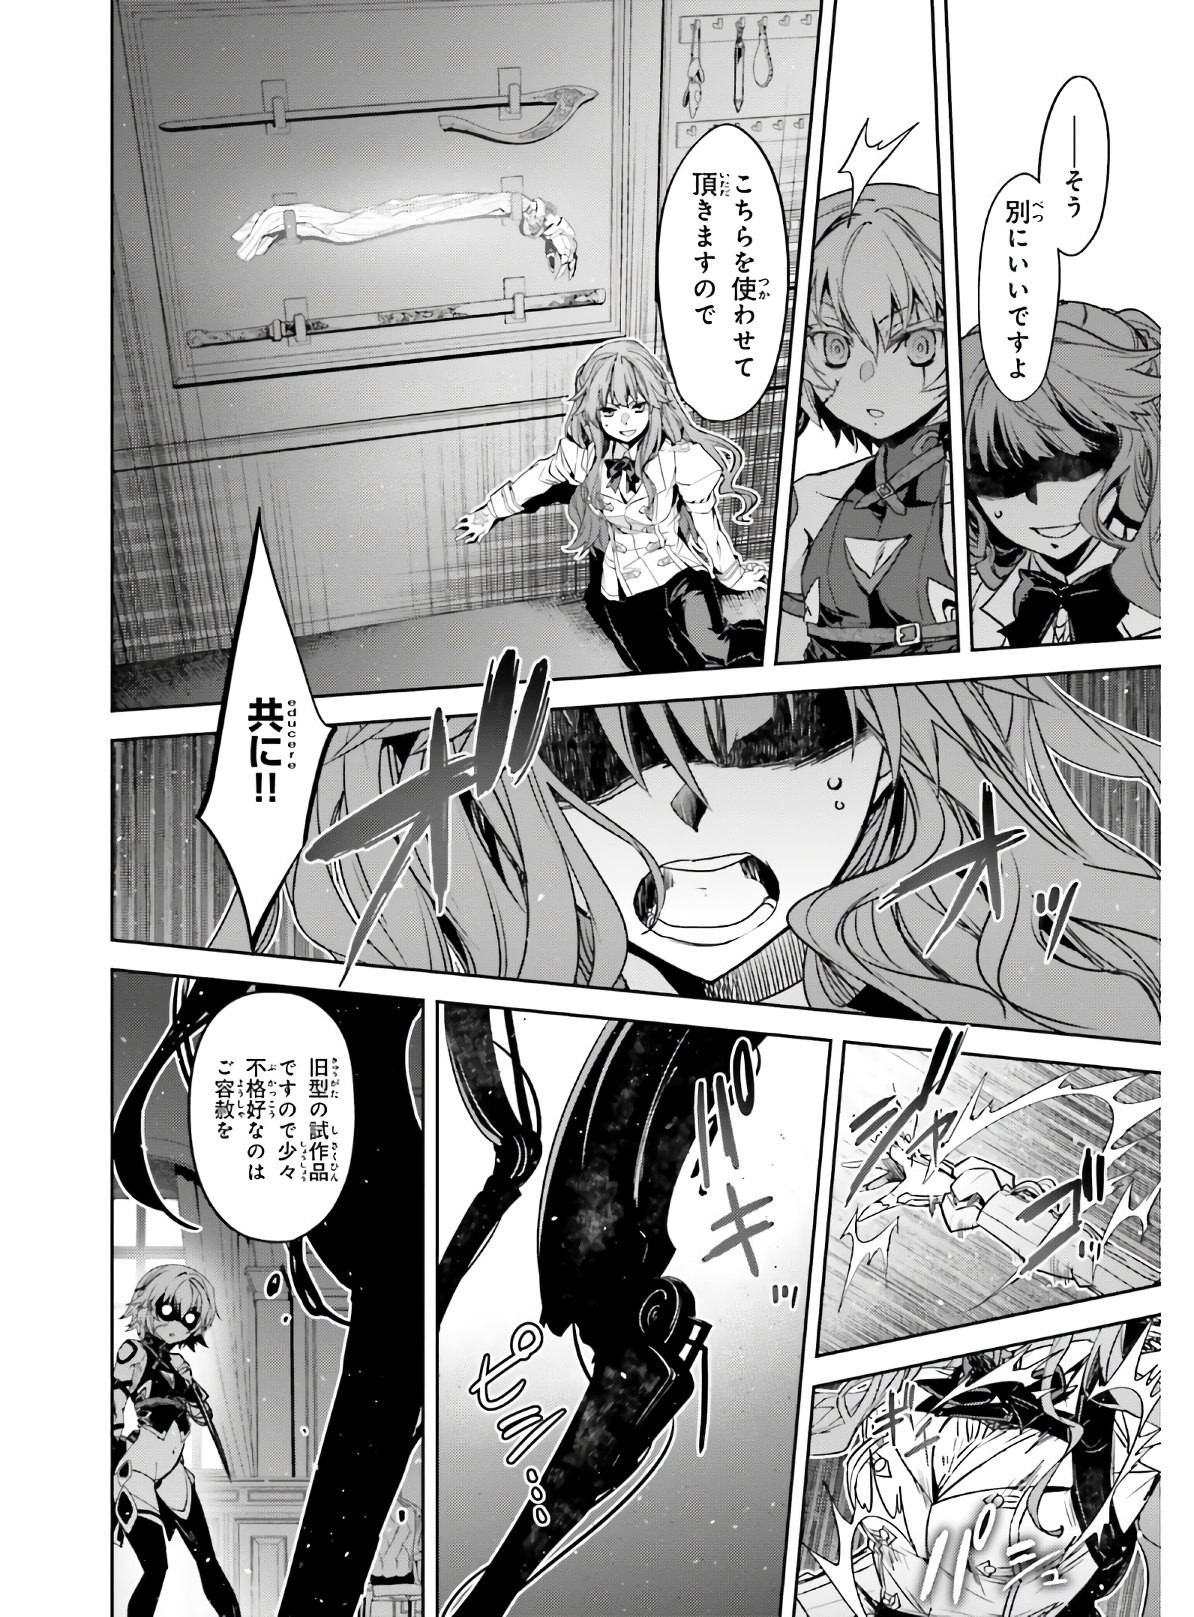 Fate-Apocrypha - Chapter 45-2 - Page 2